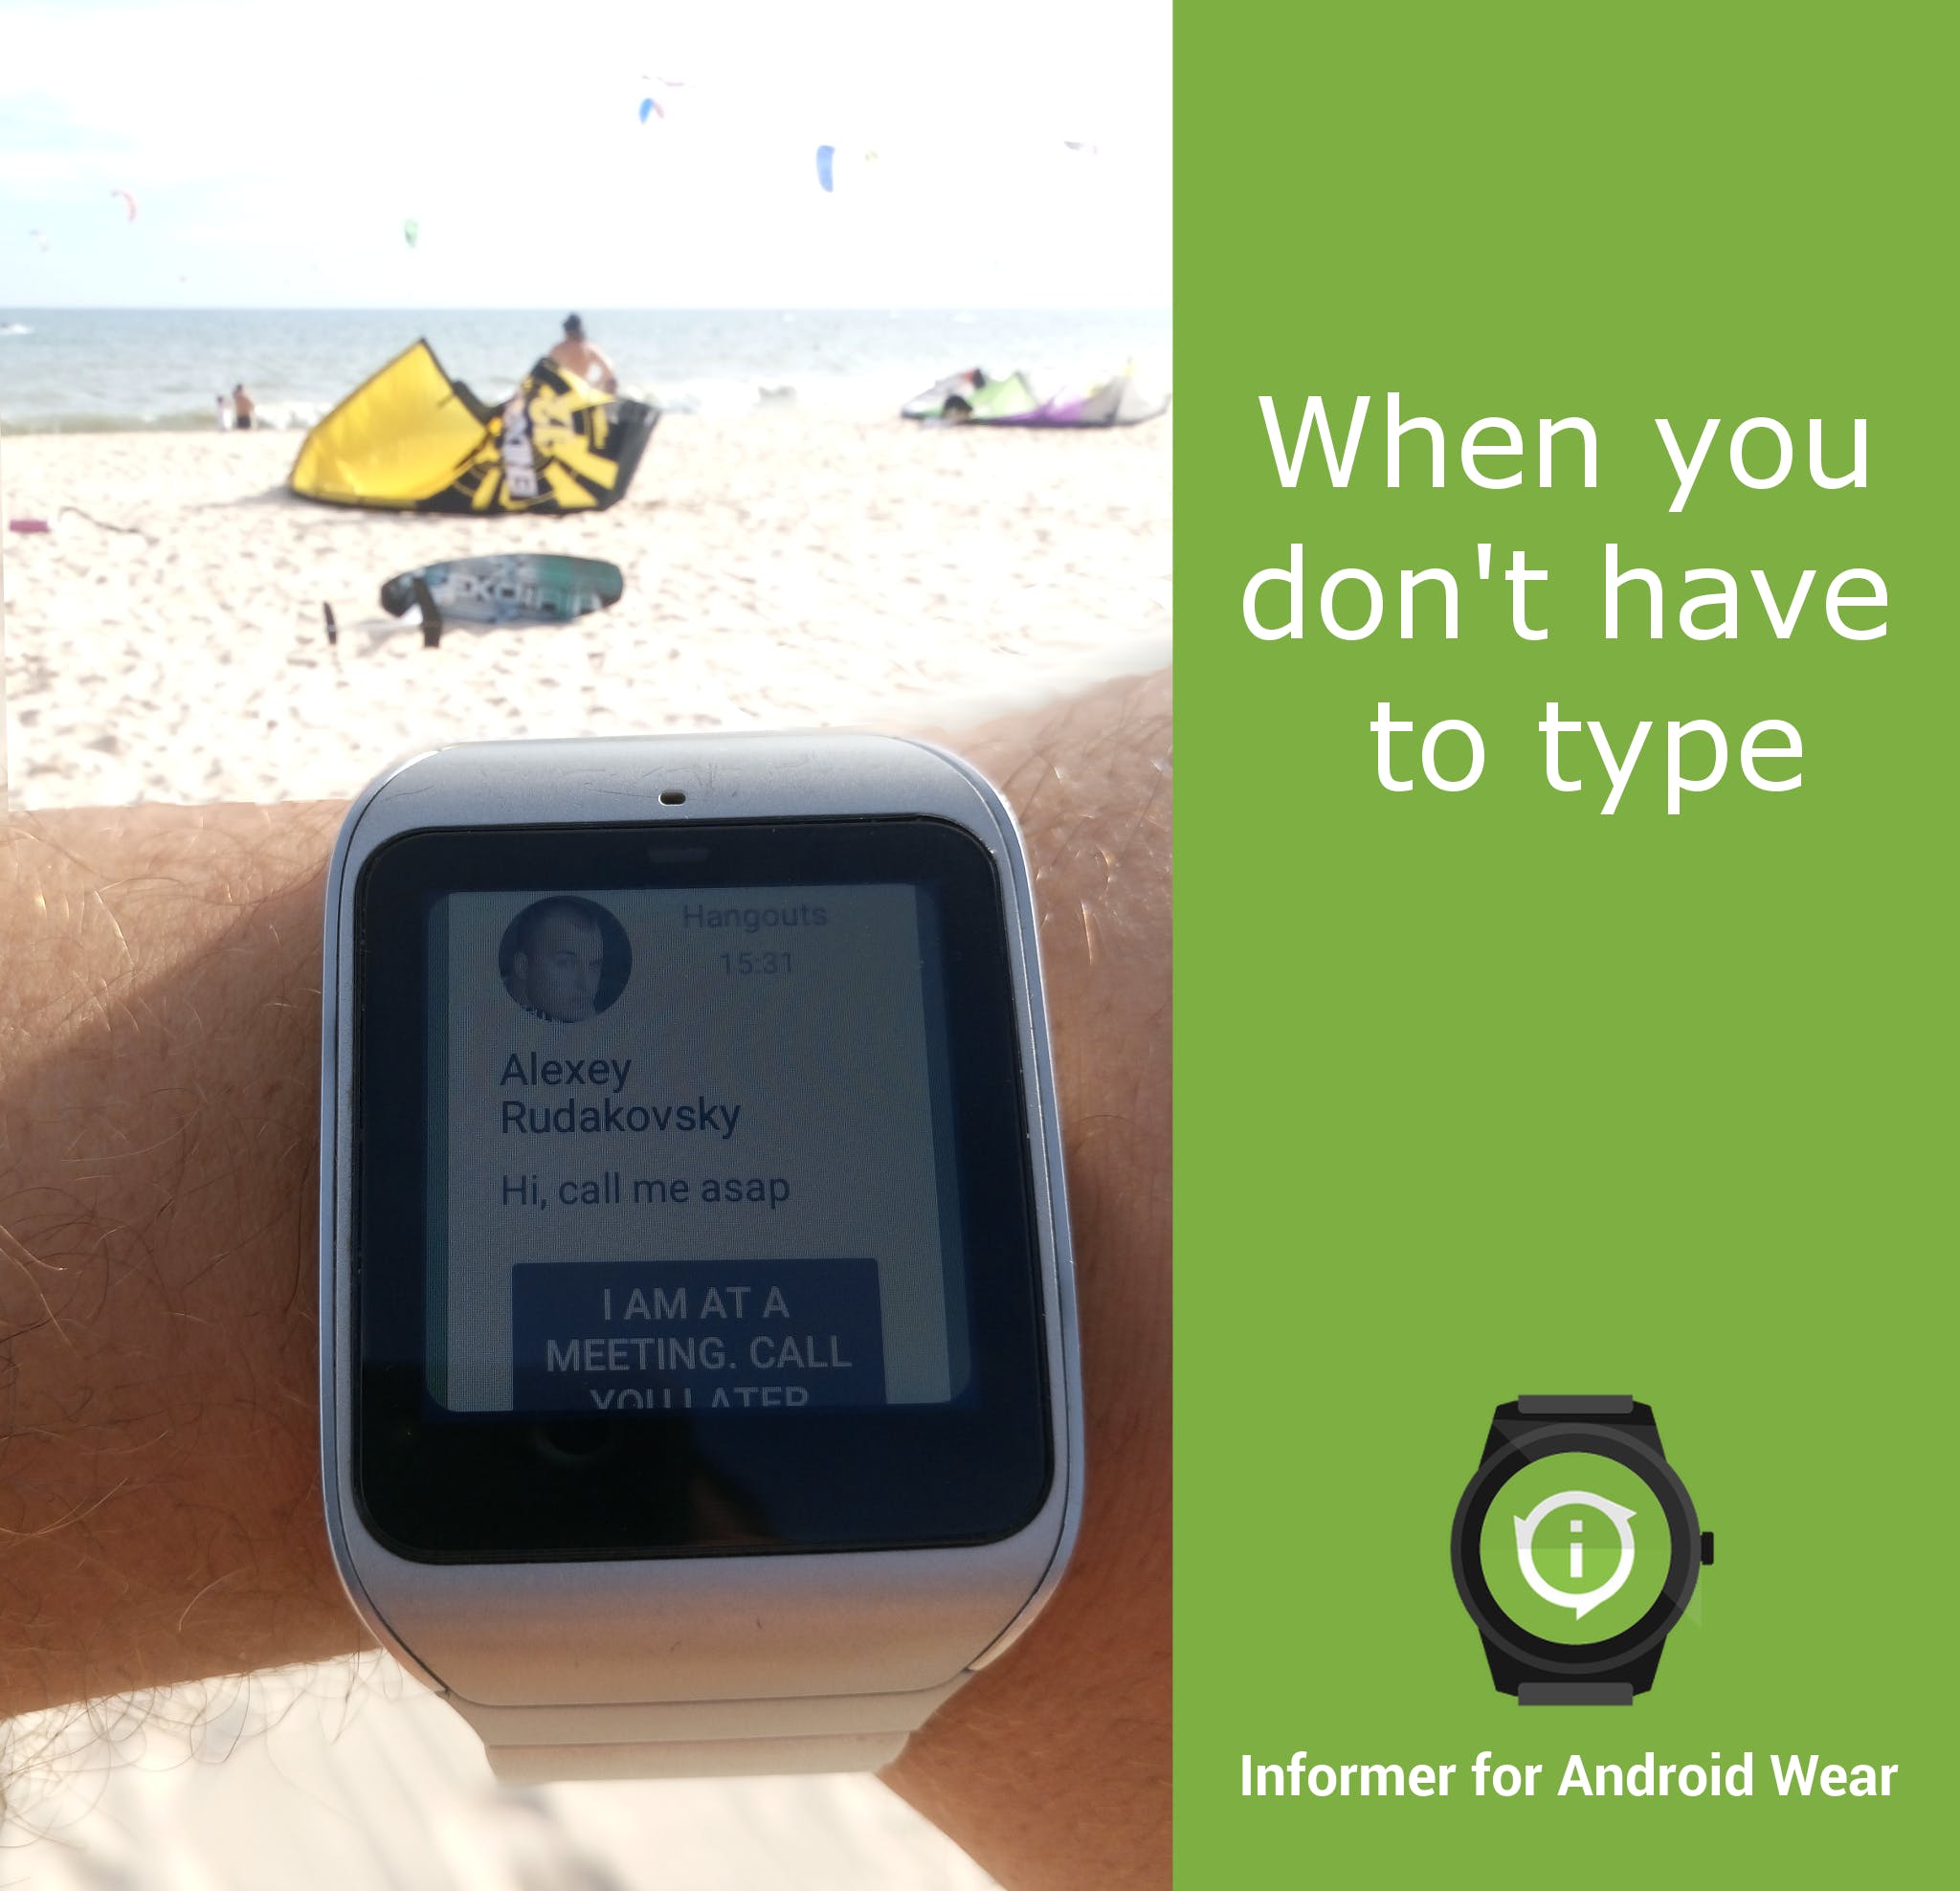 Informer for Android Wear media 2